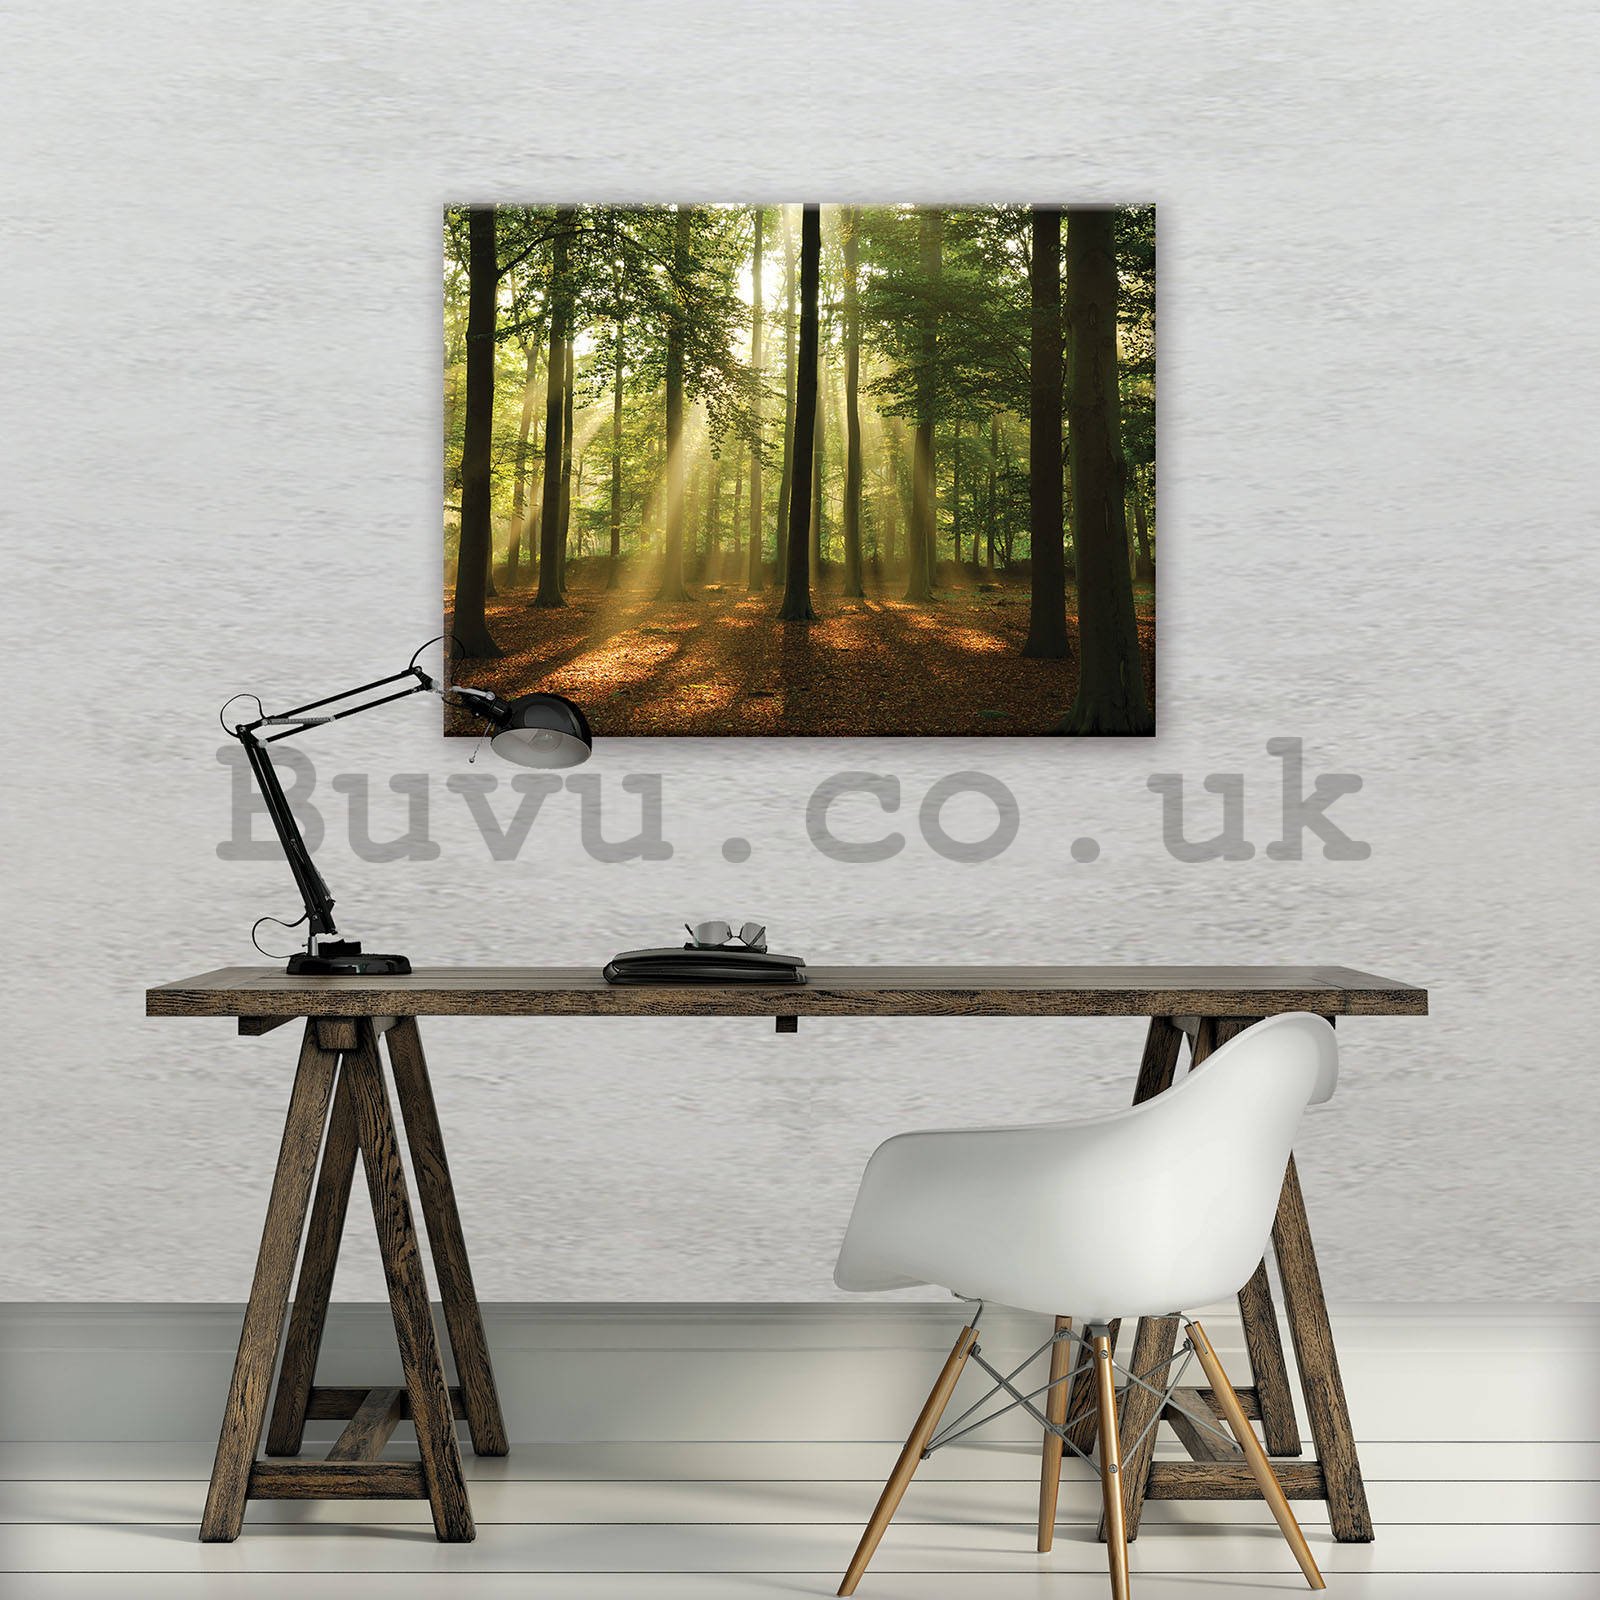 Painting on canvas: Sun in the Forest (4) - 80x60 cm